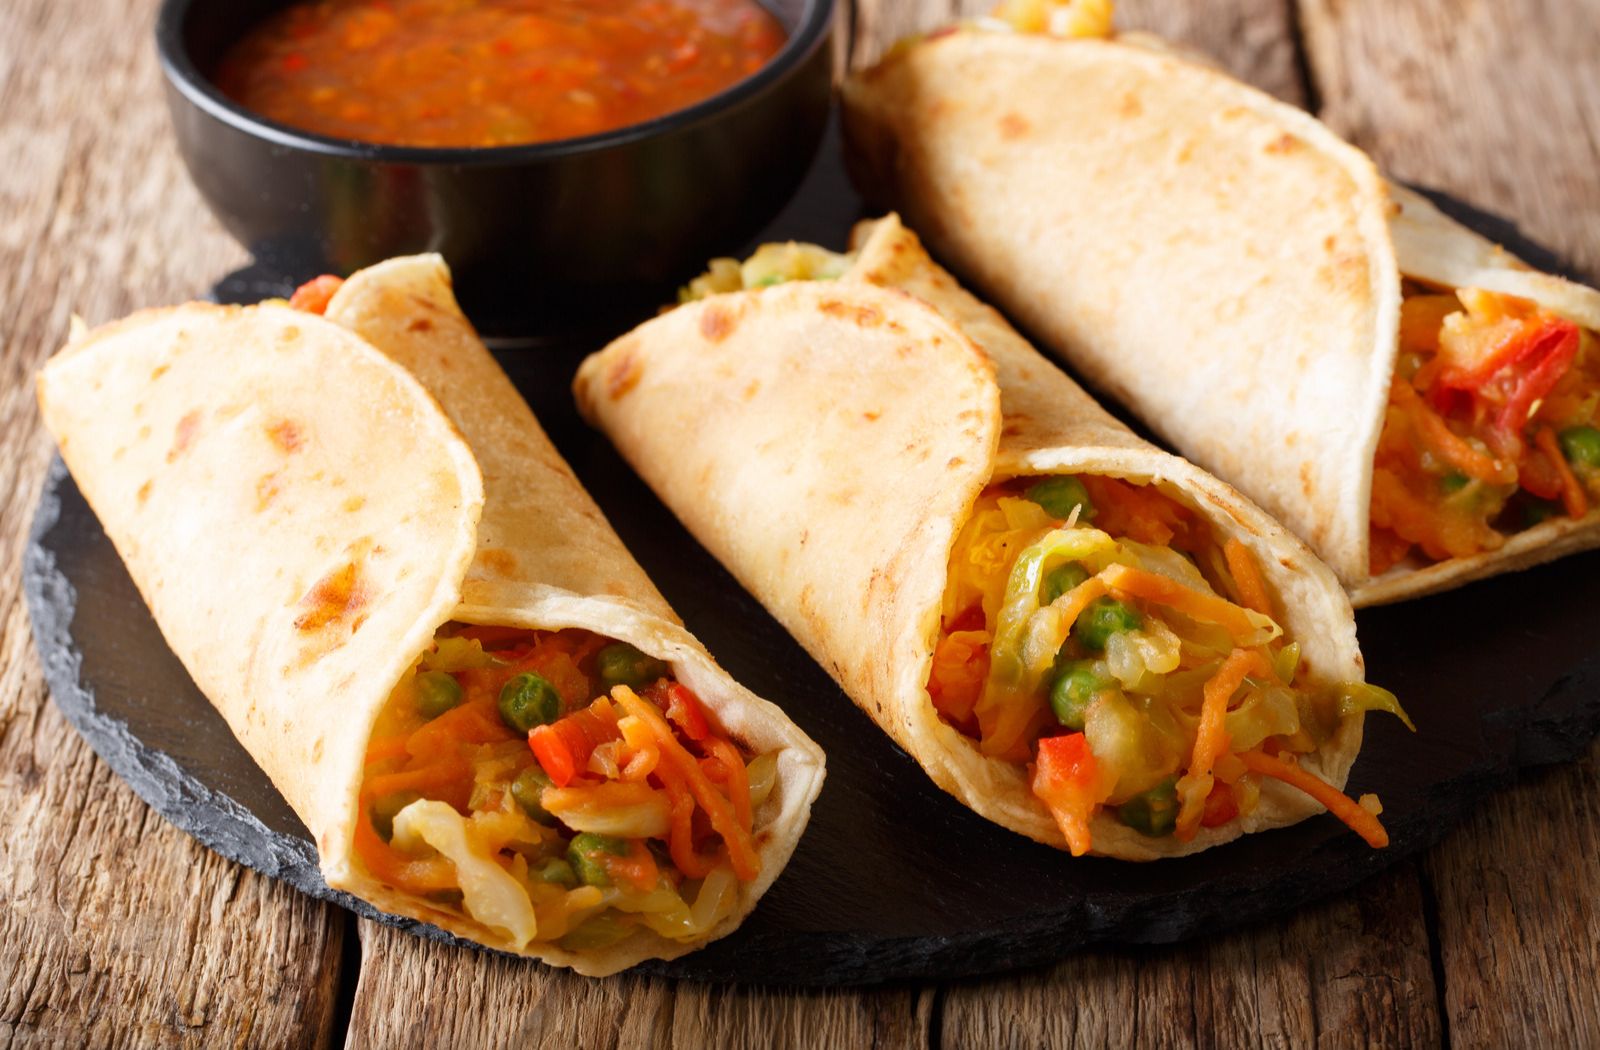 Wraps Stuffed With Spices Dry Fruits Recipe